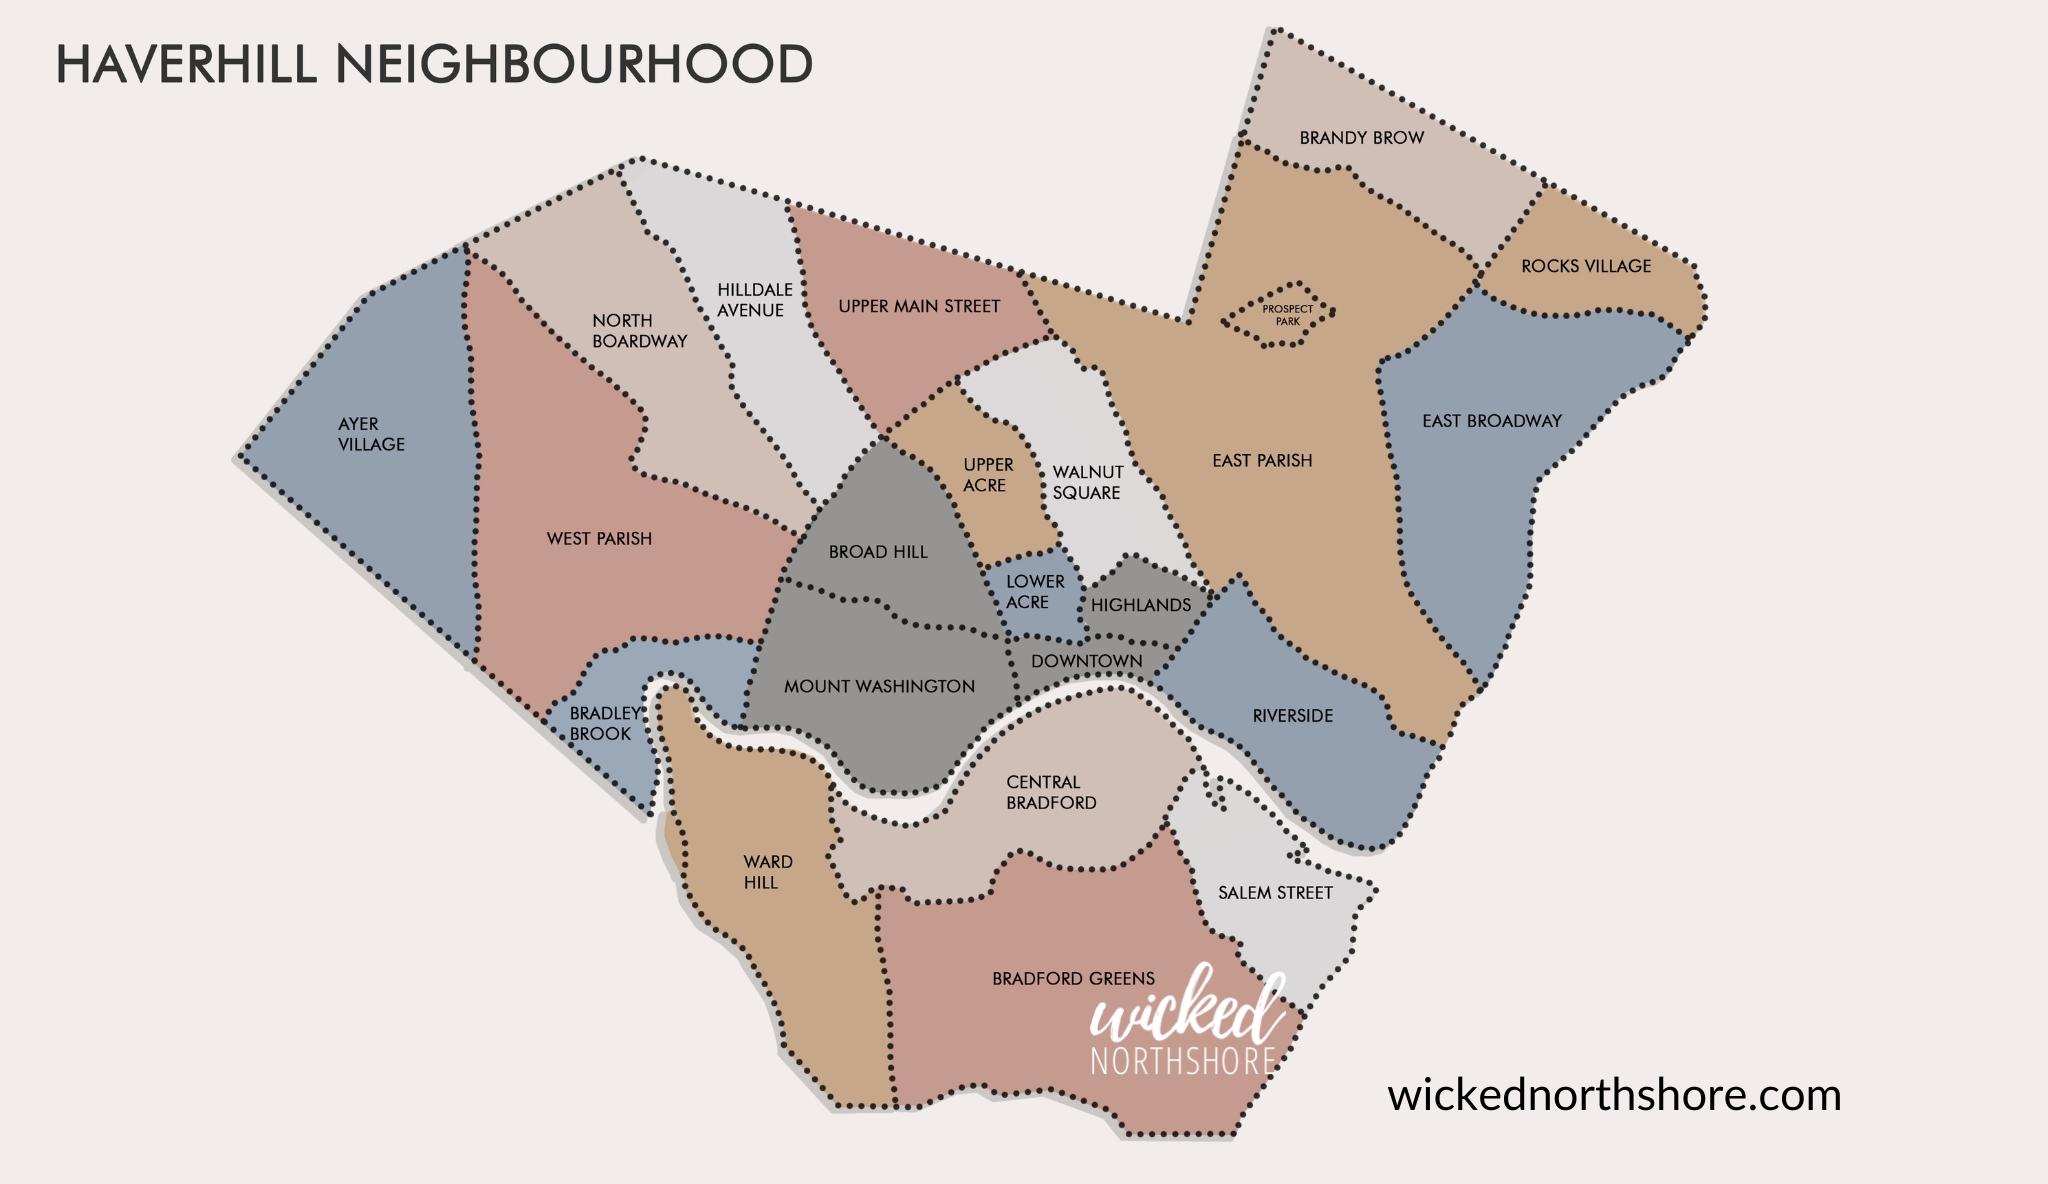 Haverhill neighborhoods - Moving to Haverhill MA - Wicked Northshore